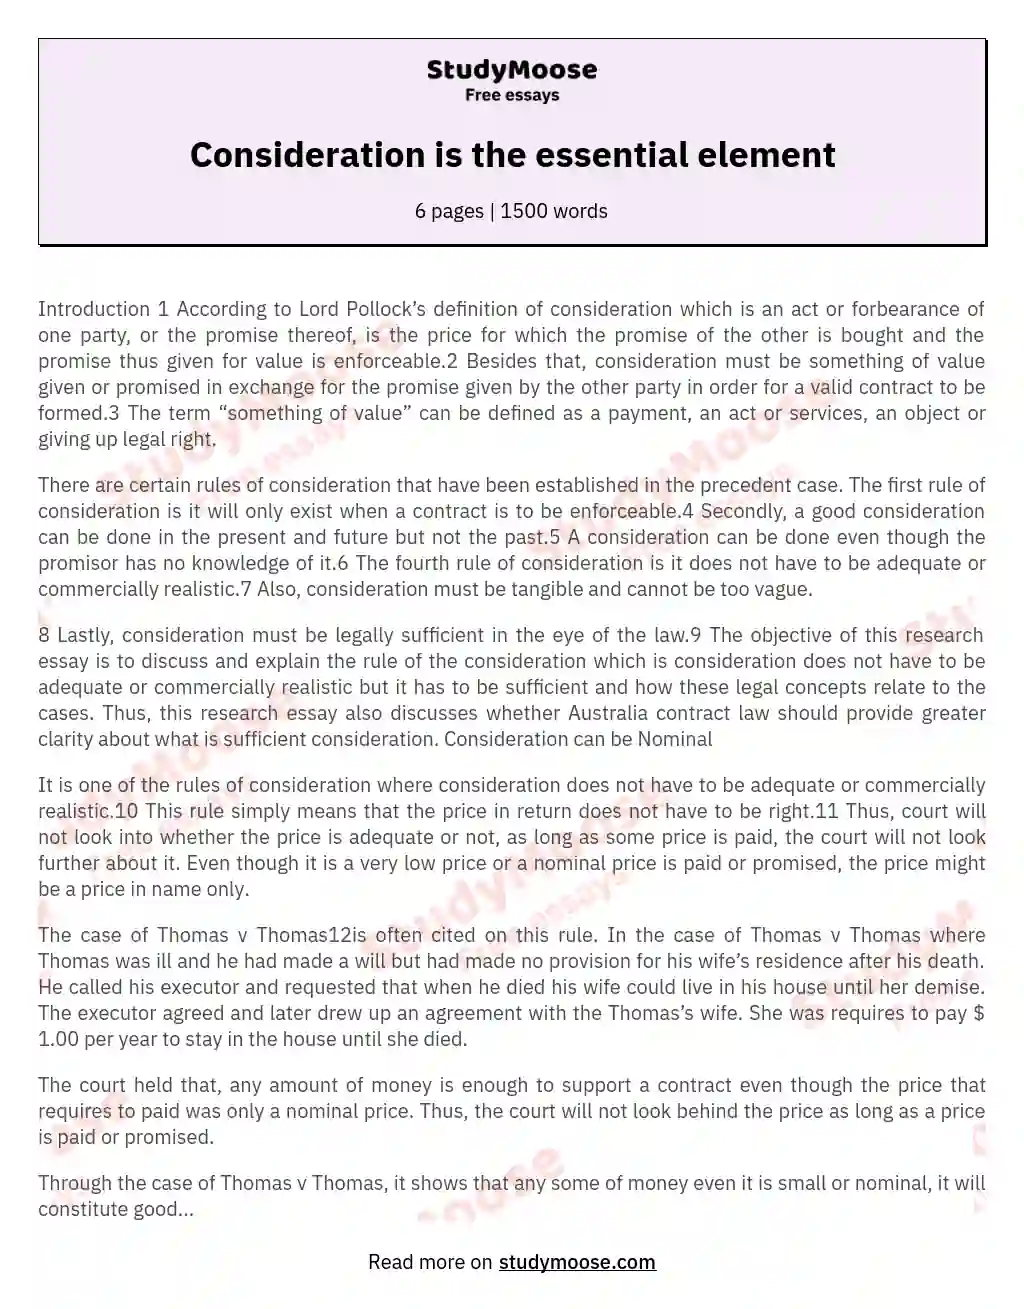 Consideration is the essential element essay